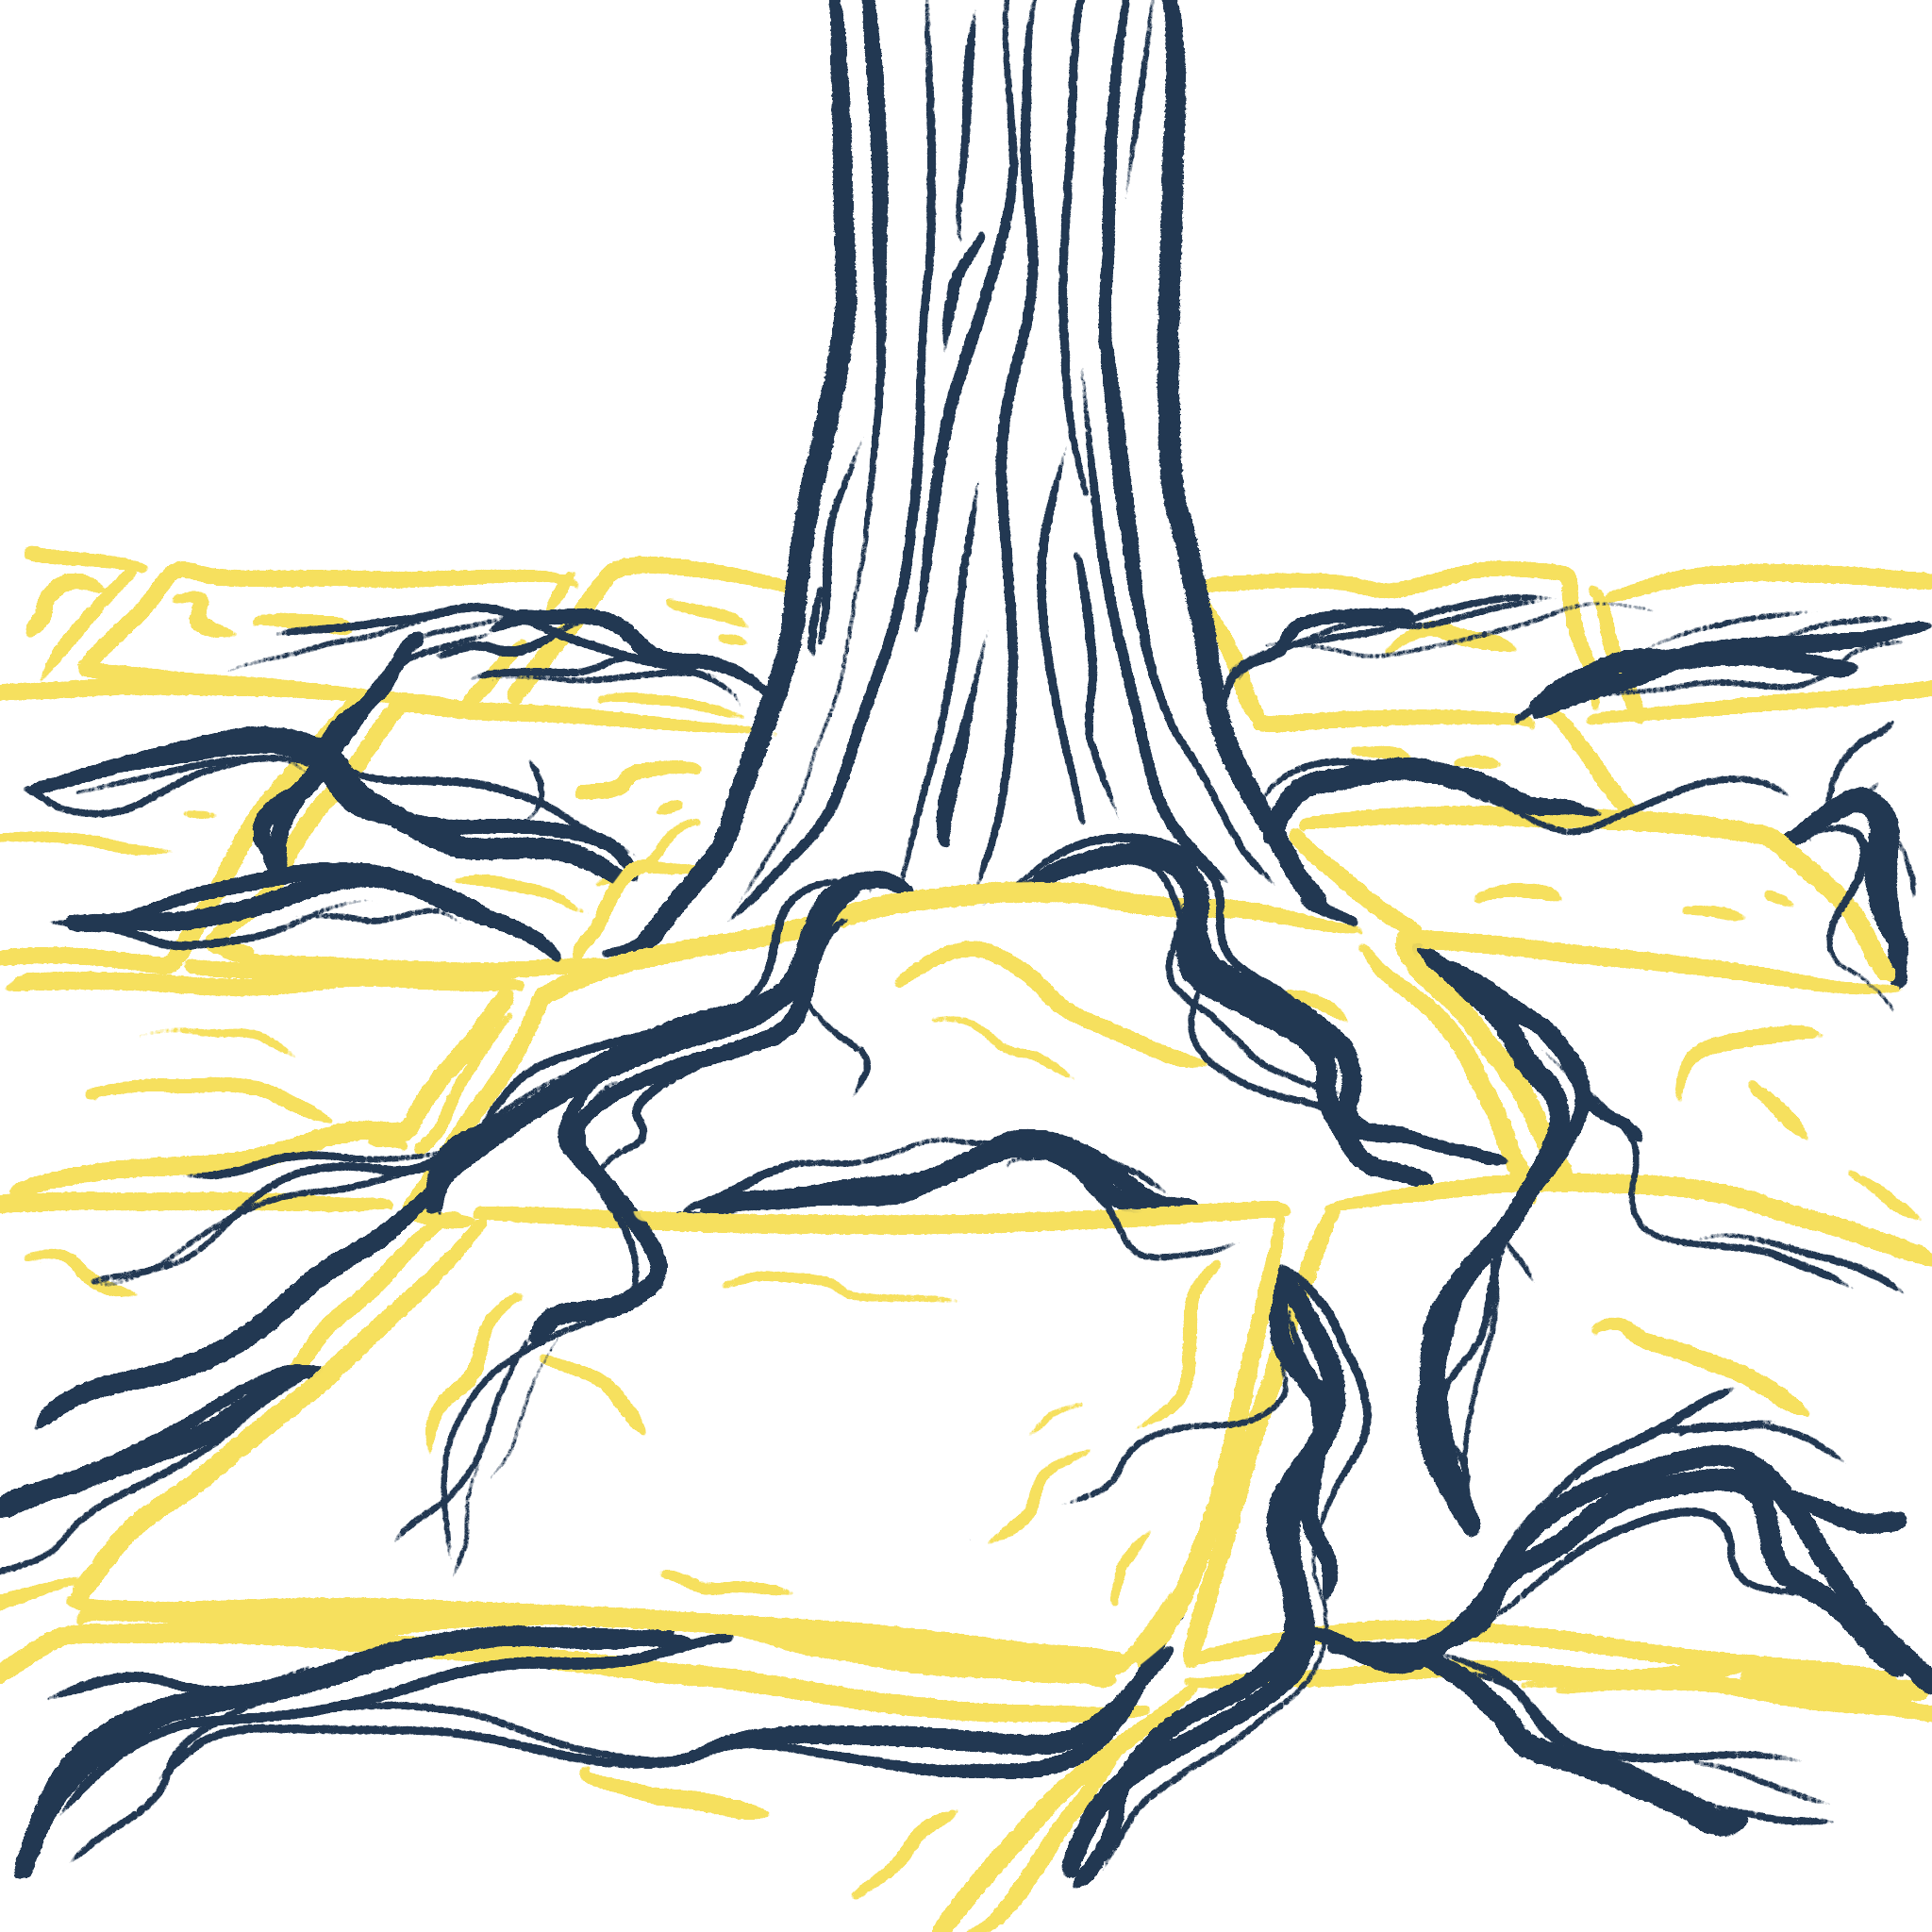 Illustration of a tree with paving laid around it. The tree's roots are growing up through the paving.